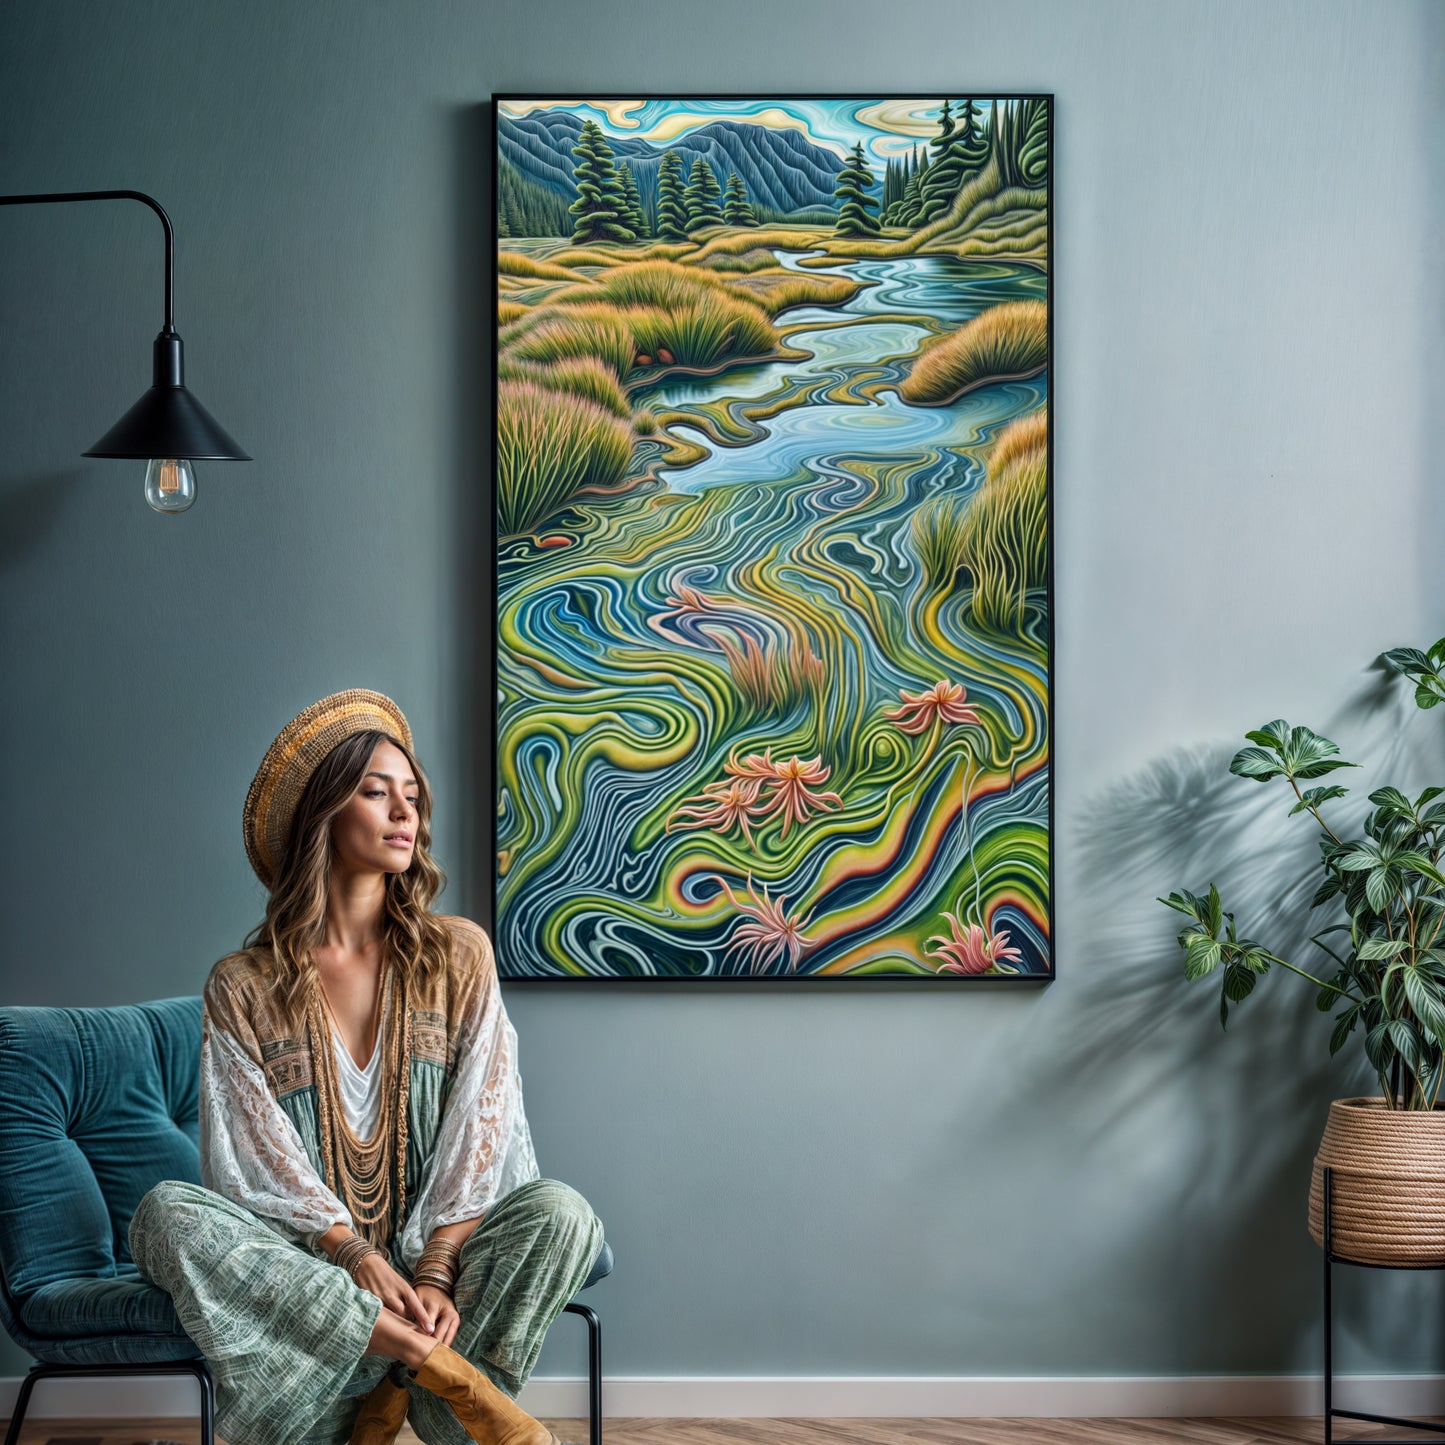 Canvas Print: "Flowing Serenity"